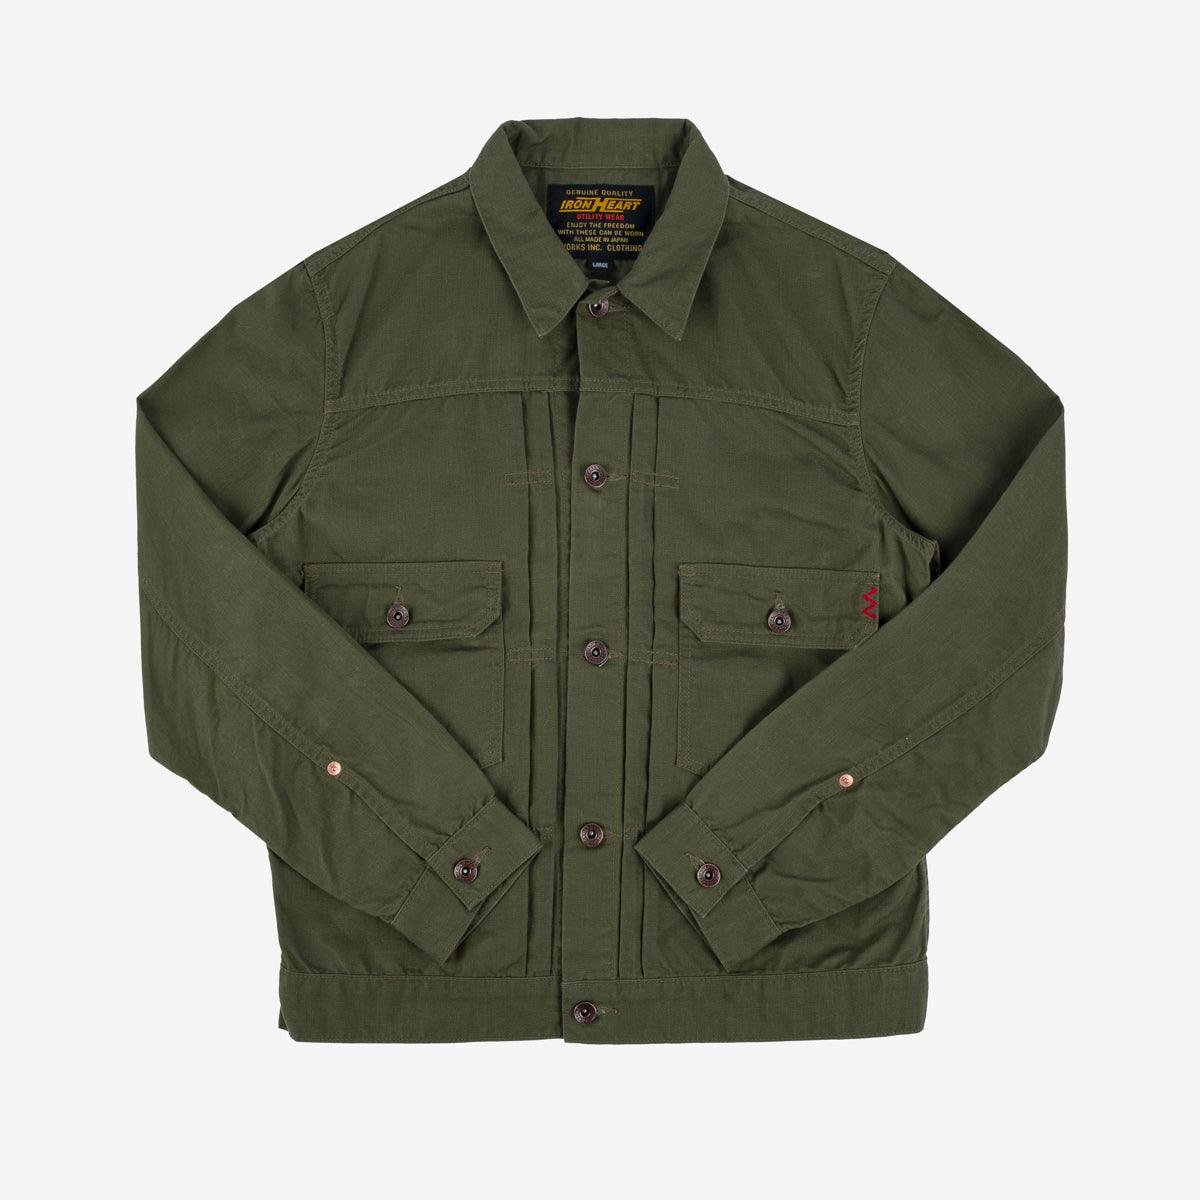 Image showing the IHJ-134-ODG - 9oz Paraffin Coated OX Type II Jacket - Olive Drab Green which is a Jackets described by the following info SS24 and sold on the IRON HEART GERMANY online store